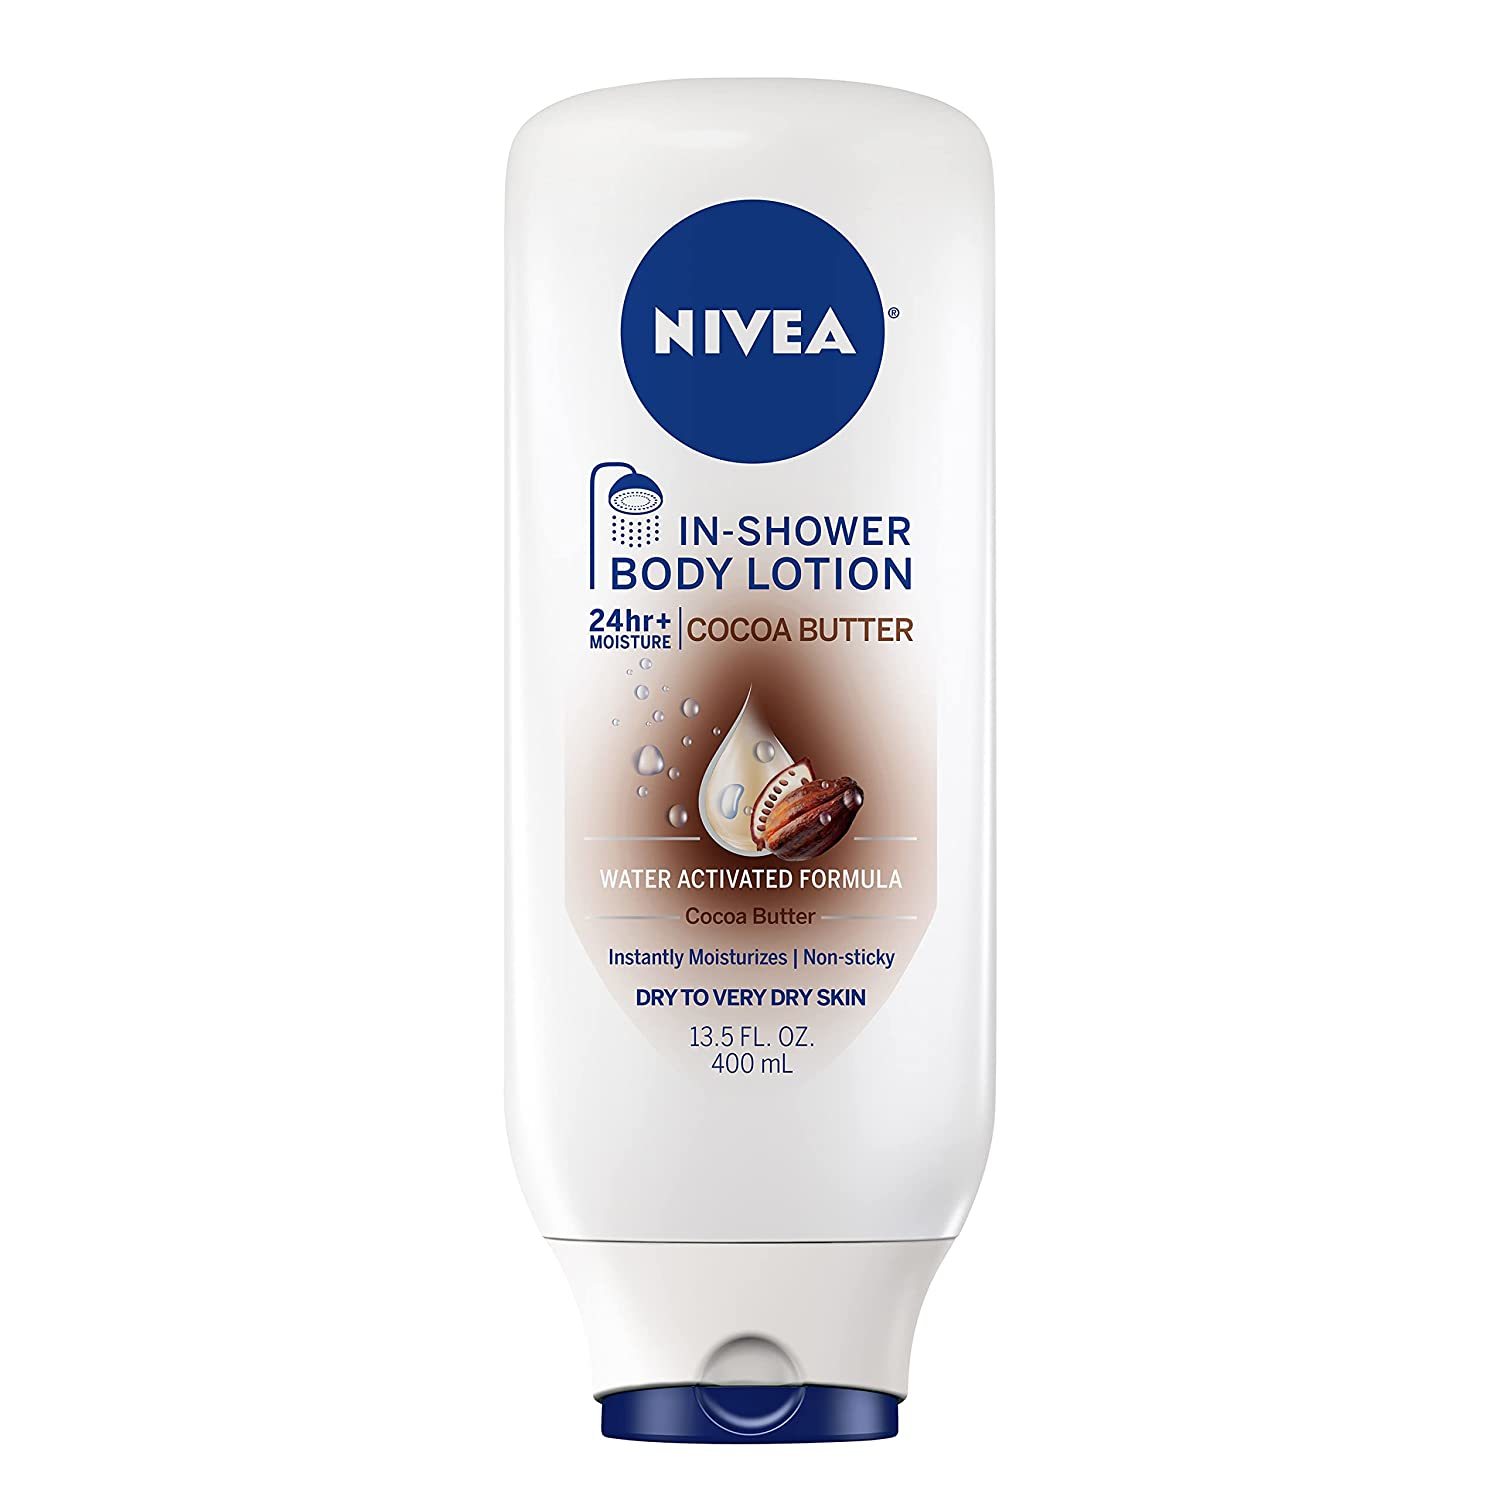 New NIVEA Cocoa Butter In Shower Lotion, Body Lotion for Dry Skin, 13.5 Fl Oz